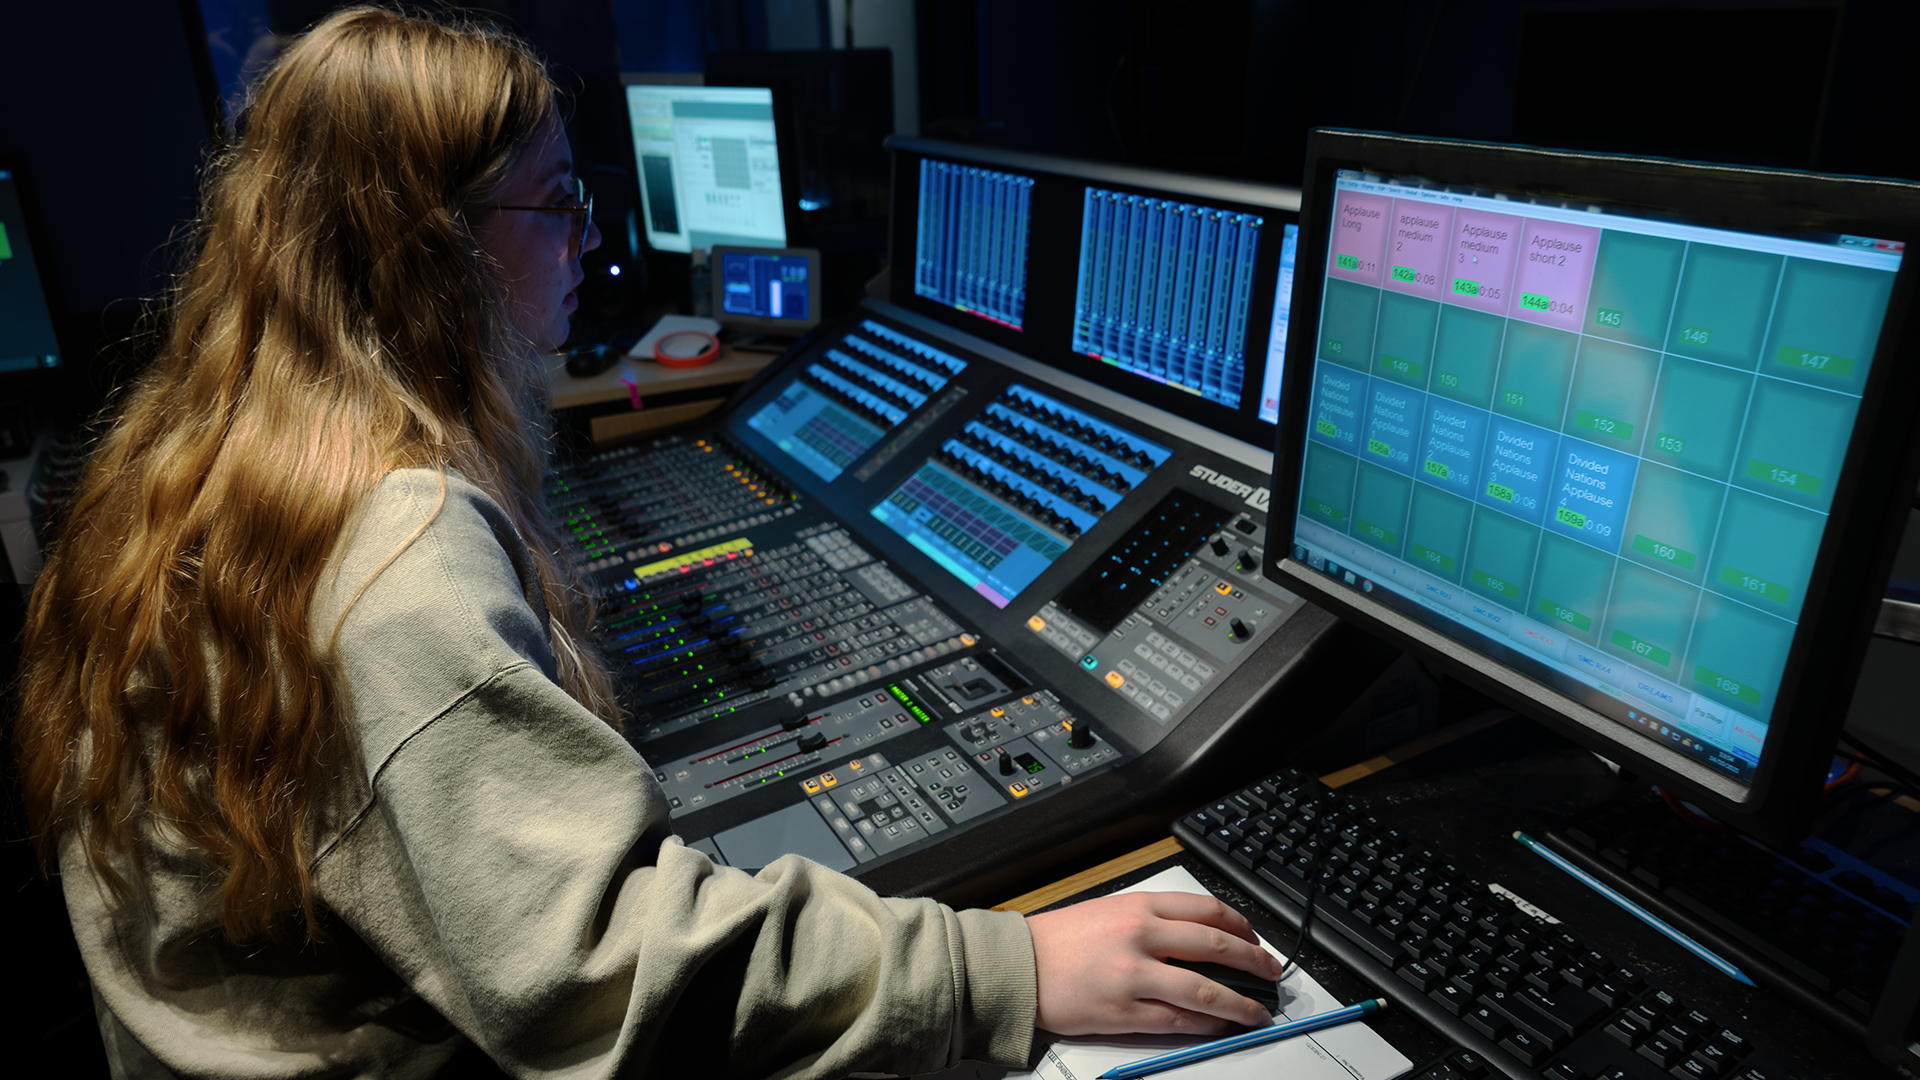 Sound for TV Production course link